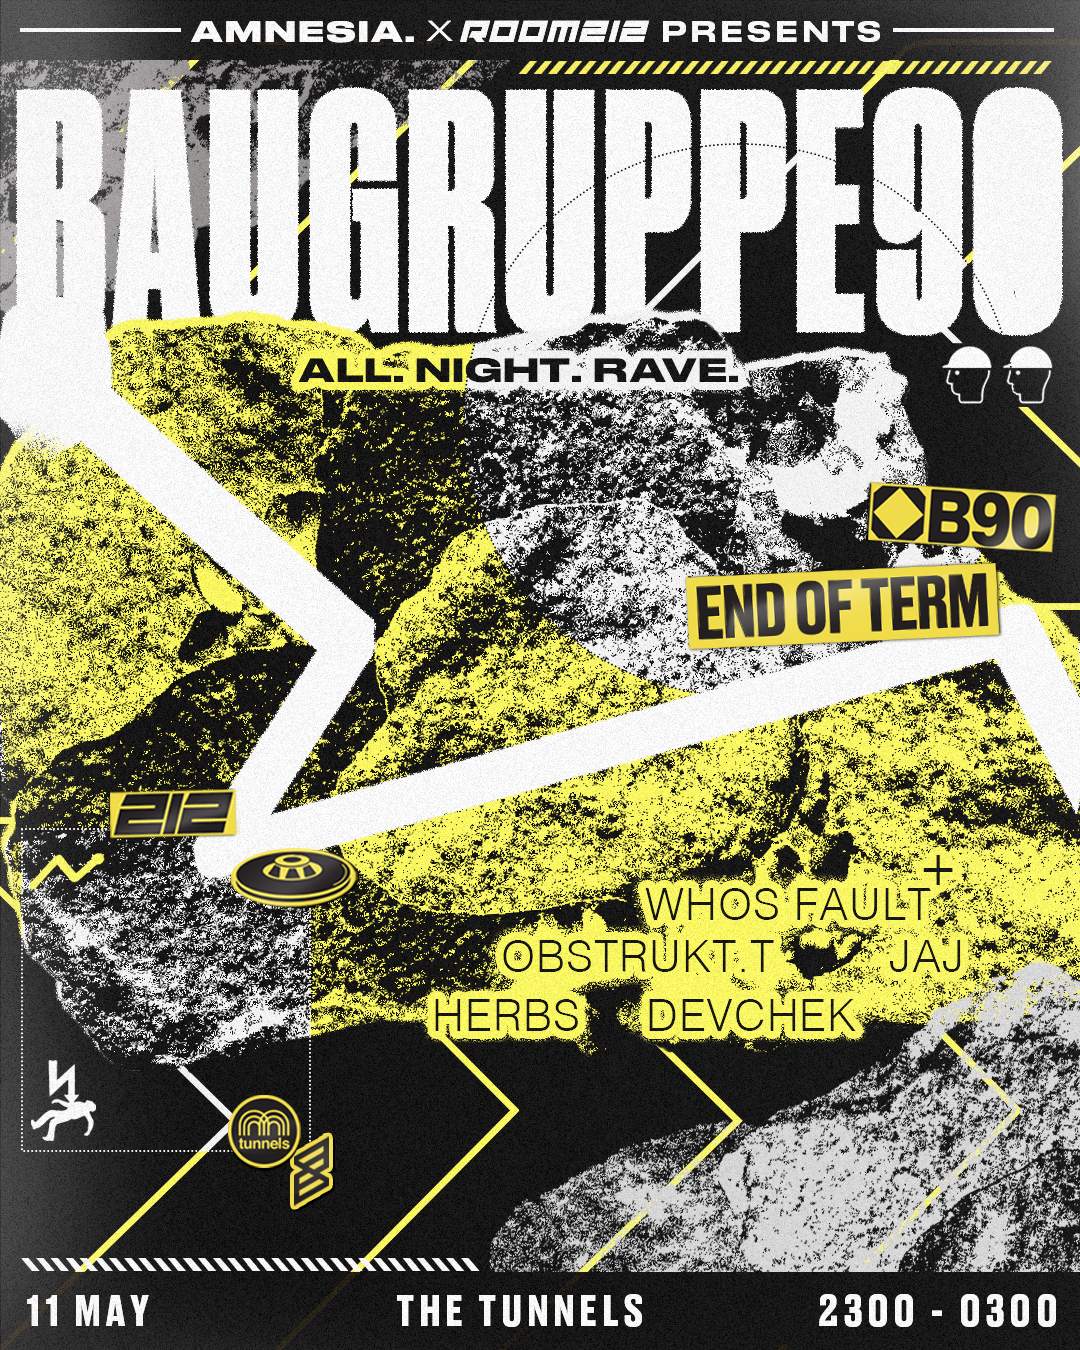 AMNESIA X ROOM212 PRESENTS BAUGRUPPE90 (END OF TERM SPECIAL) - Página frontal